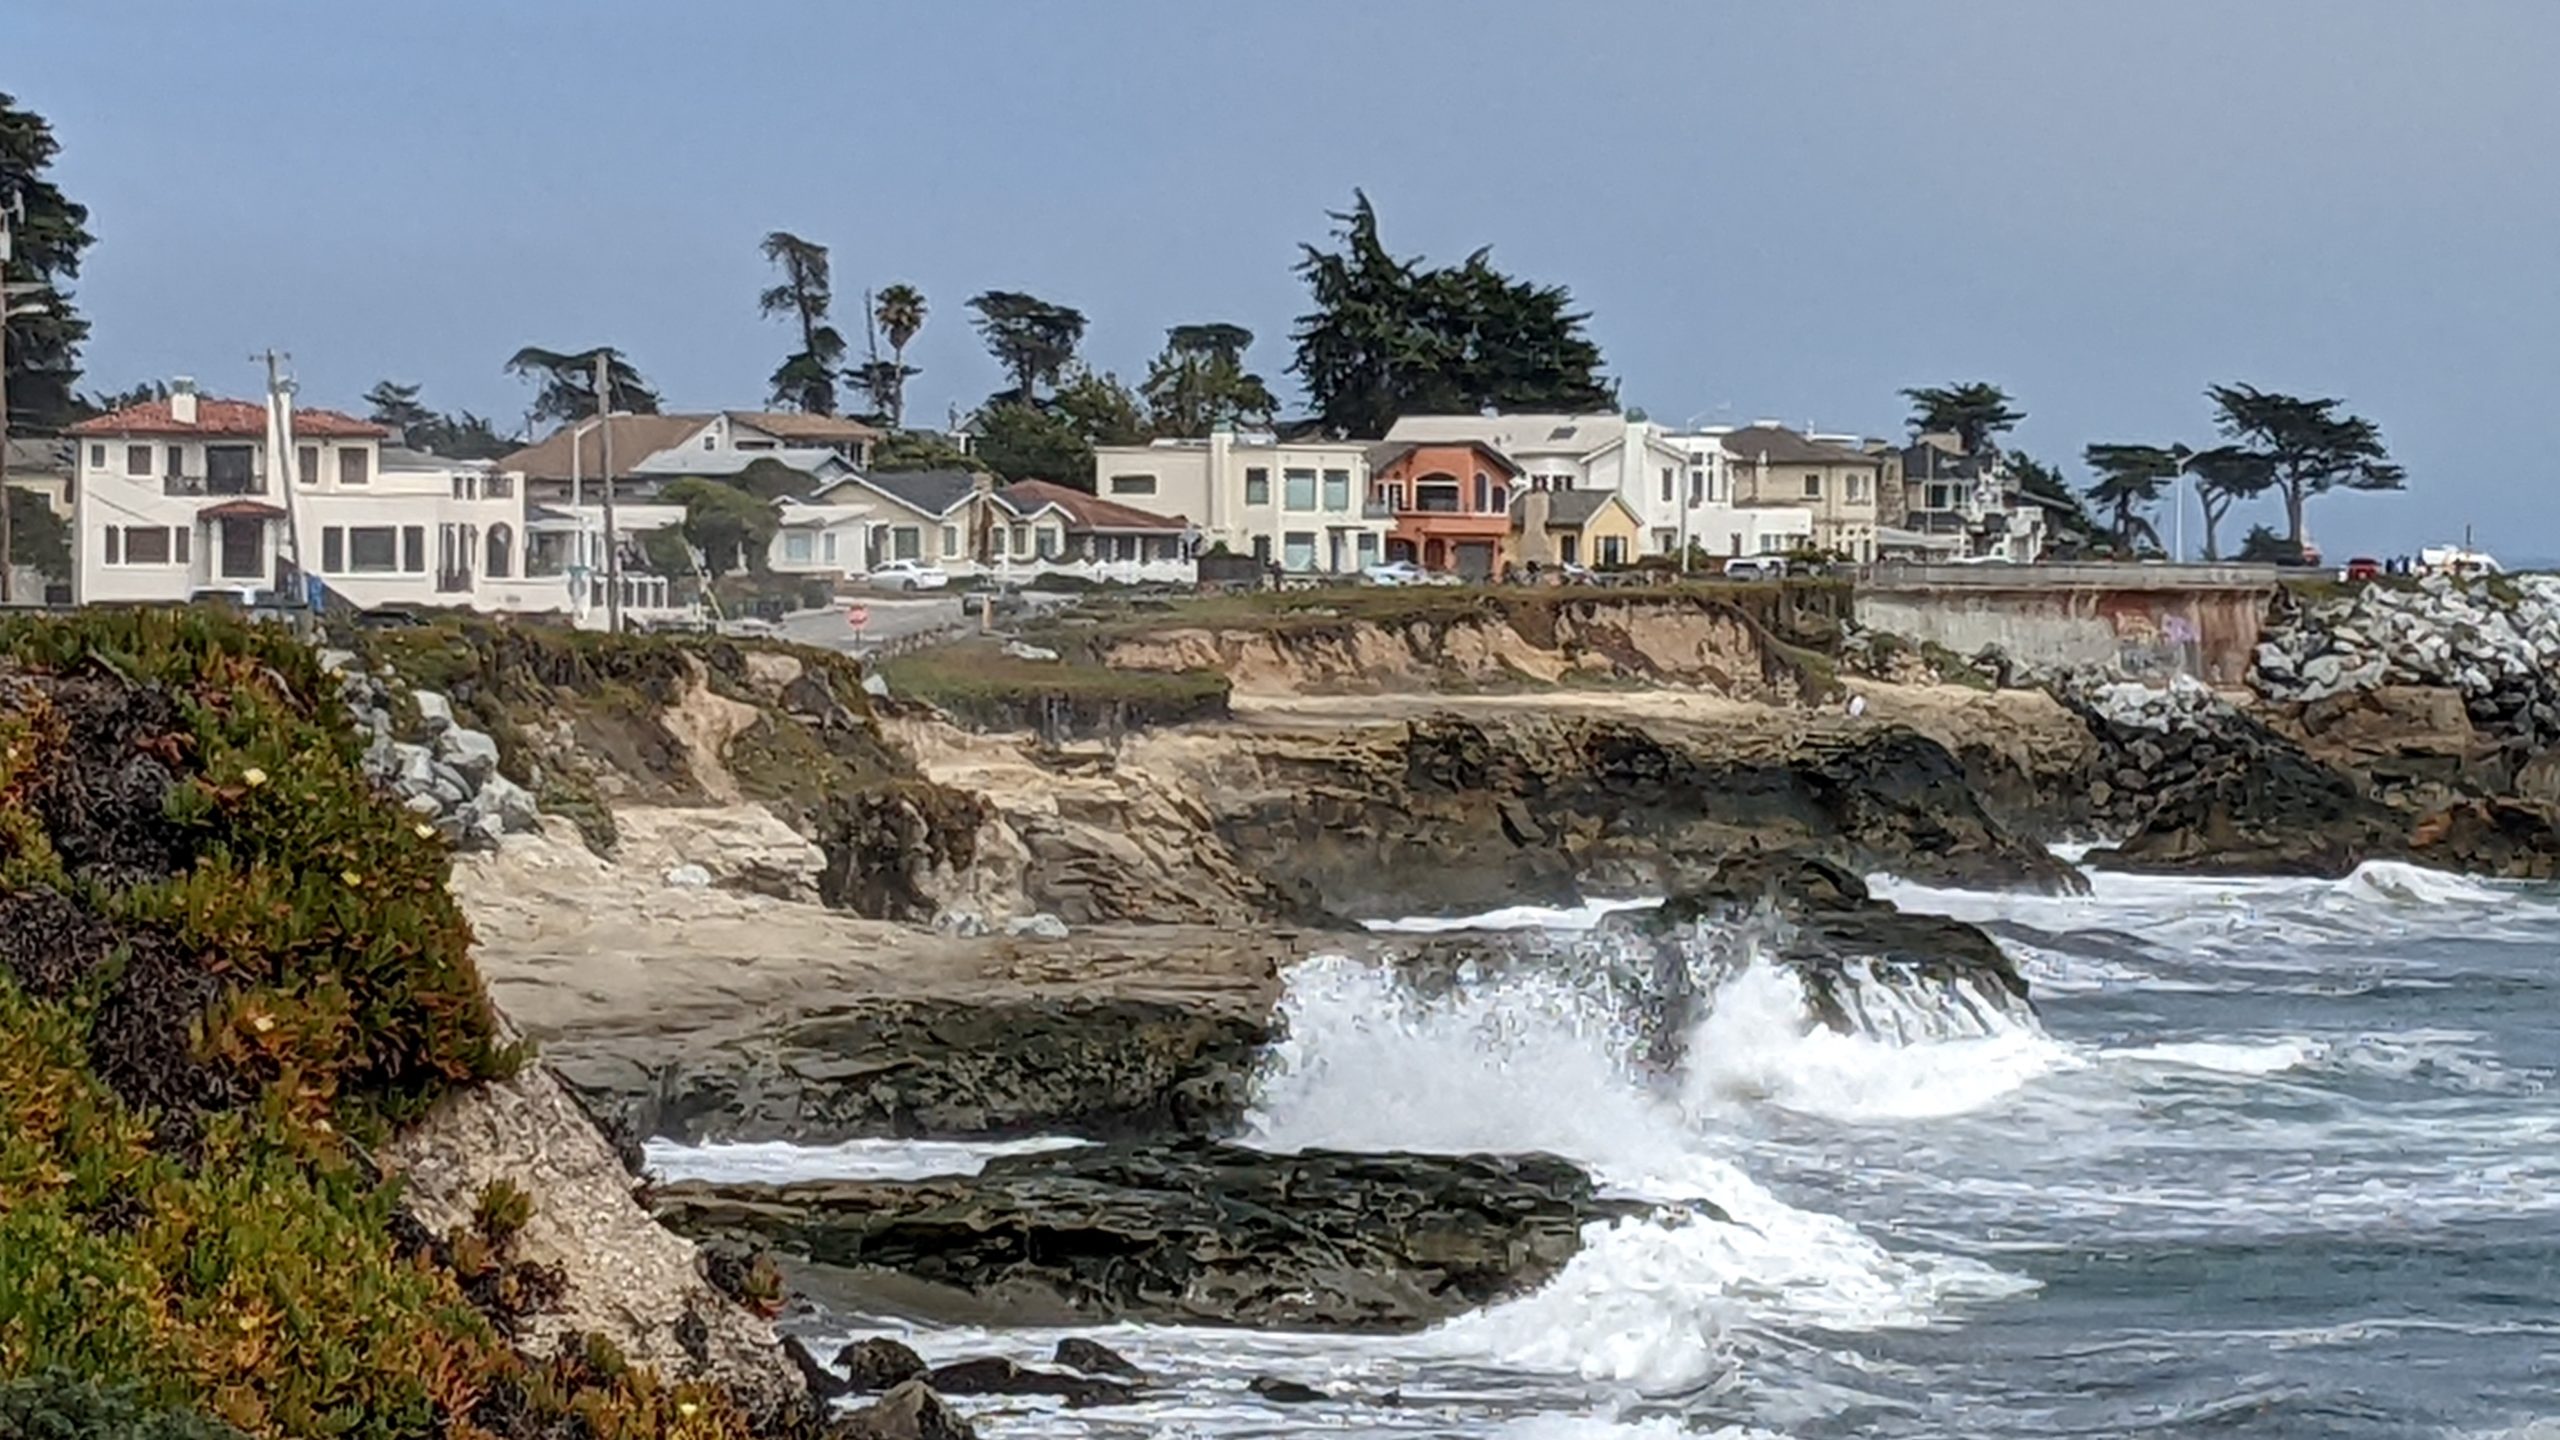 Homes on West Cliff Drive with a view of the Pacific Ocean